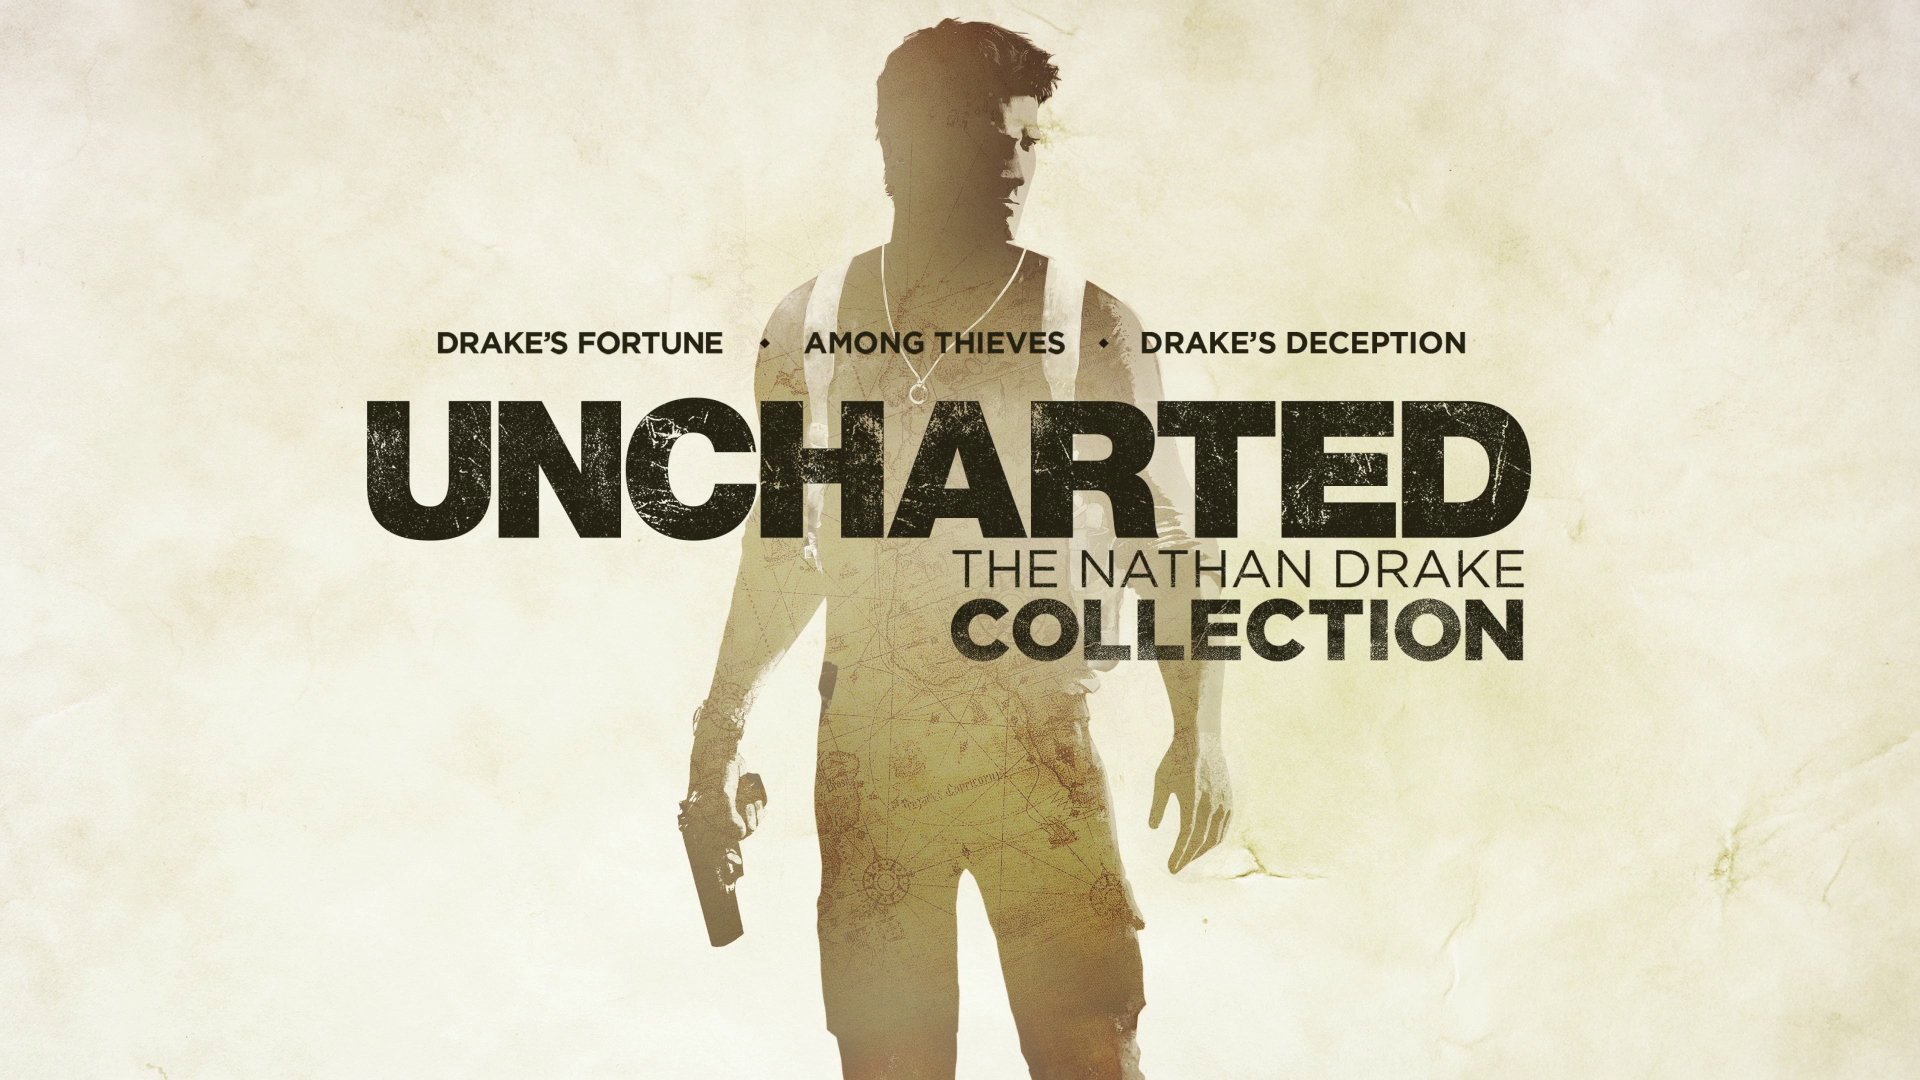 Uncharted the nathan drake collection eine unter